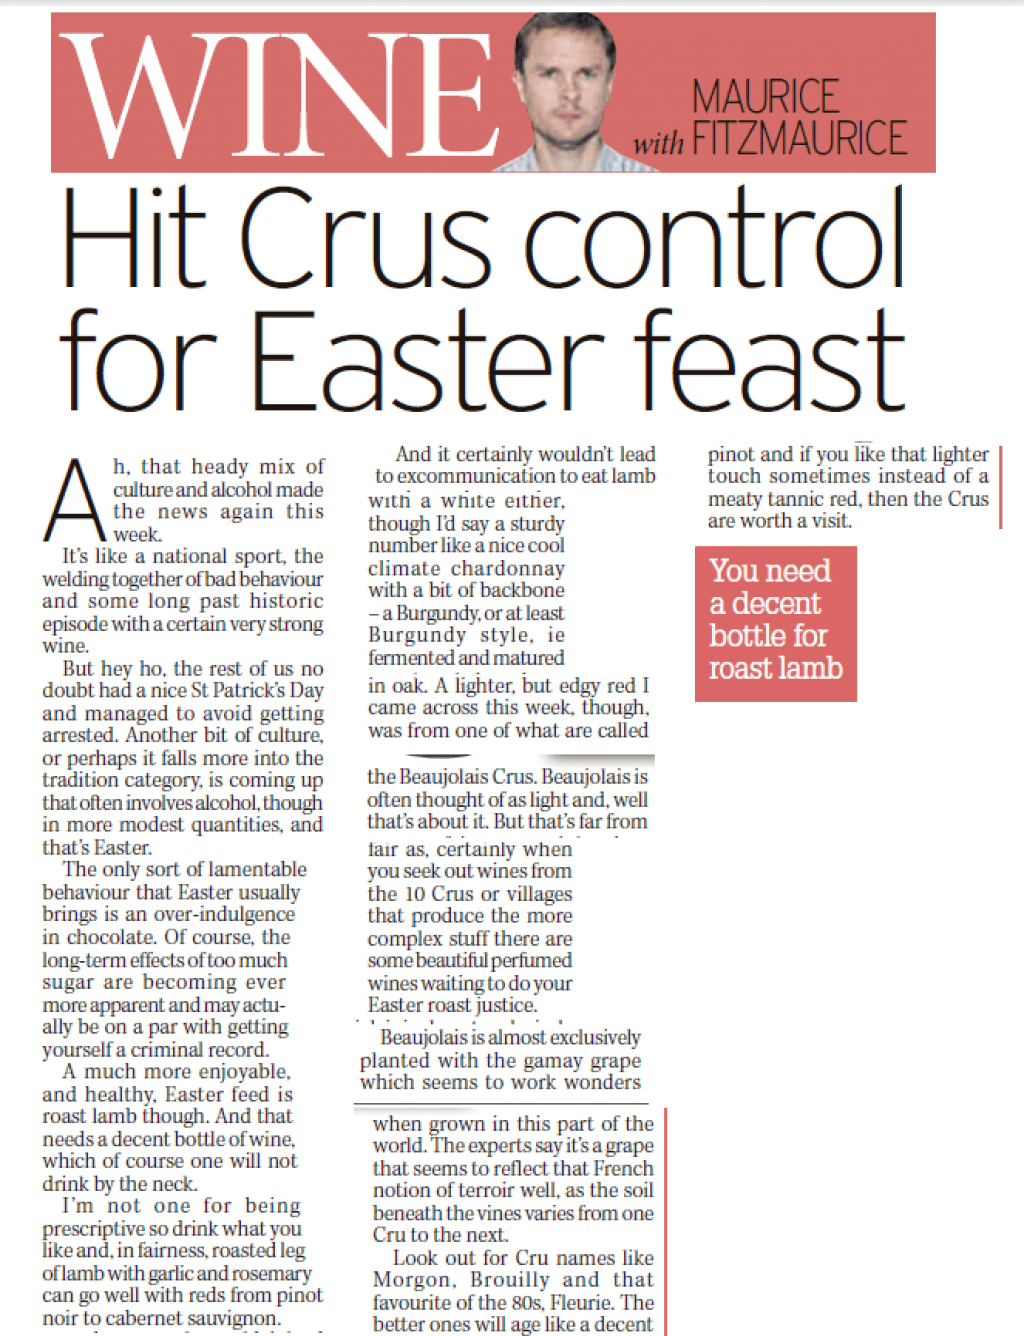 Hit Crus control for Easter feast